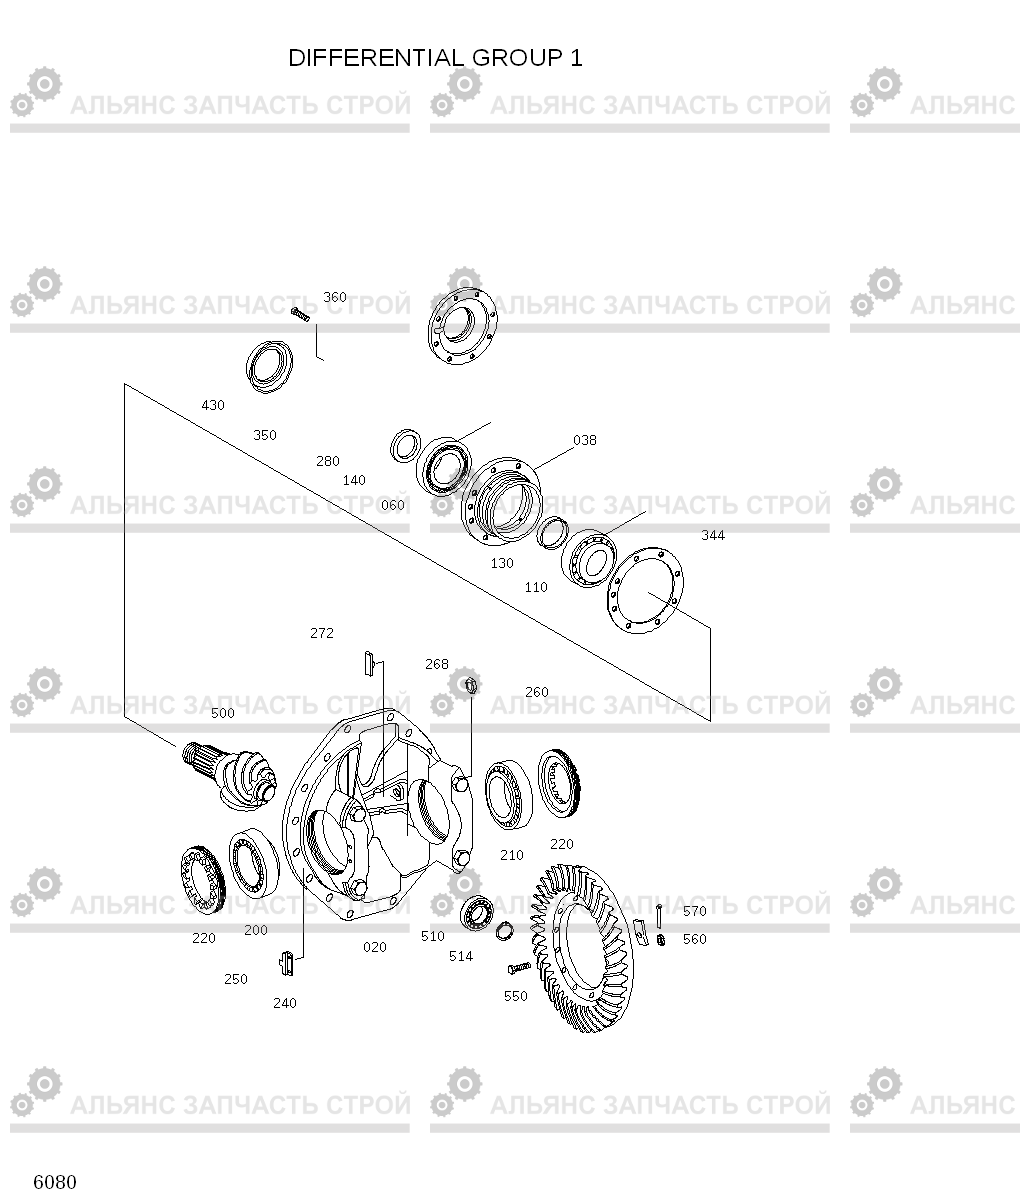 6080 DIFFERENTIAL GROUP 1 HL780-3A, Hyundai